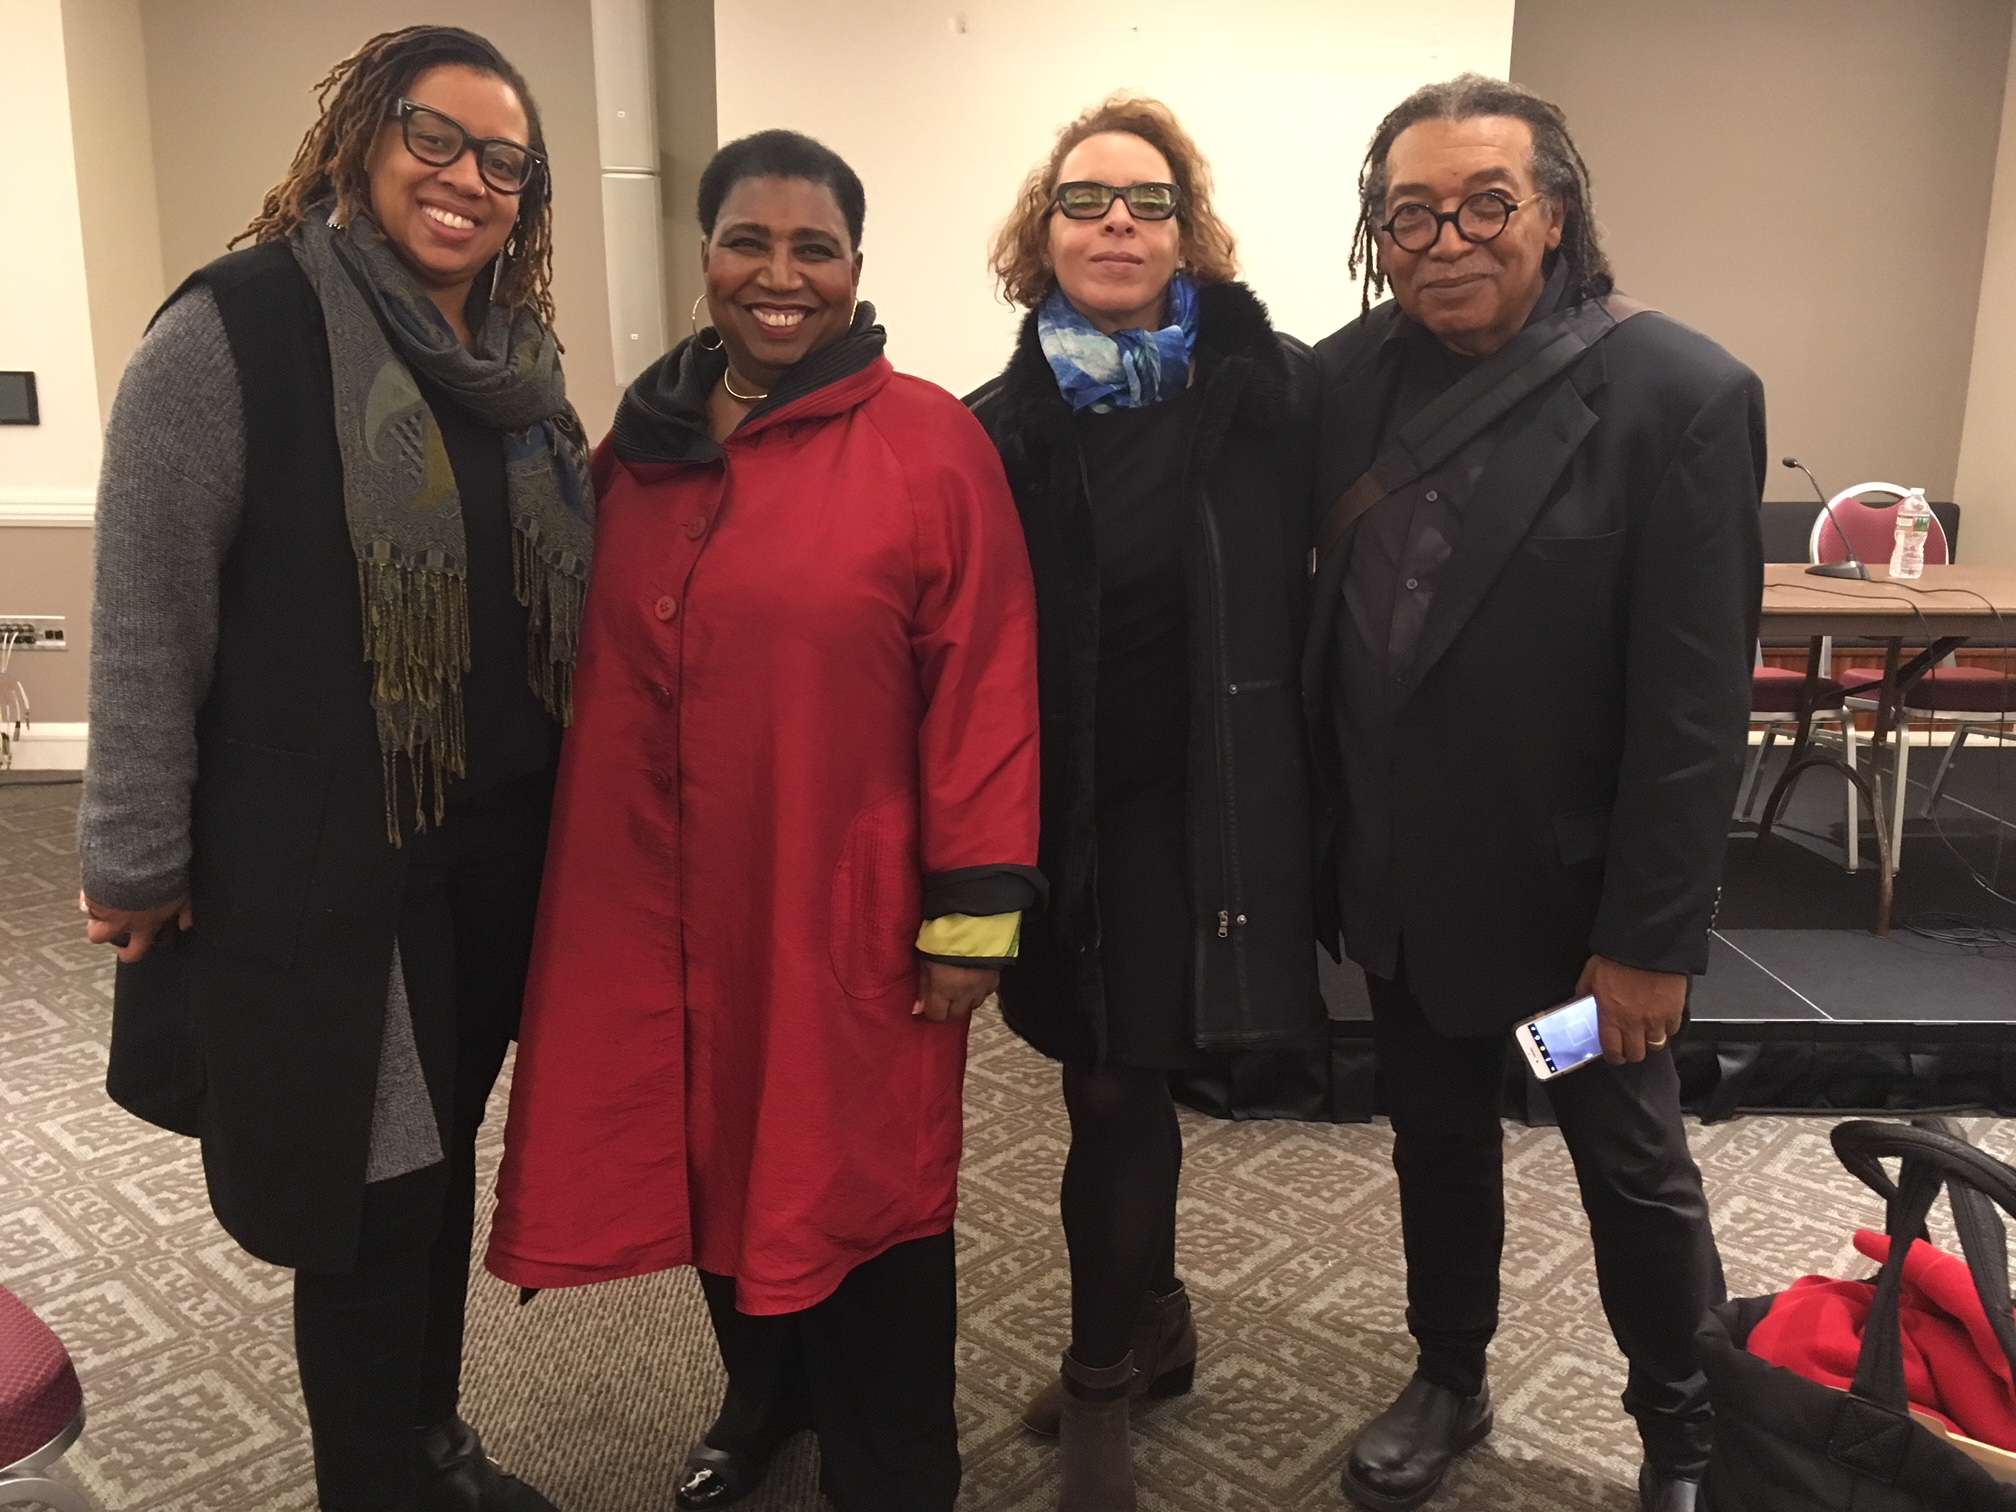  Participants in our panel "Race and Representation in the Visual Arts: A Boston Perspective" from left to right: Alexandria Smith, Callie Crossley, Vera Ingrid Grant, James Montford. &nbsp;Missing from photo: Camilo Alvarez 